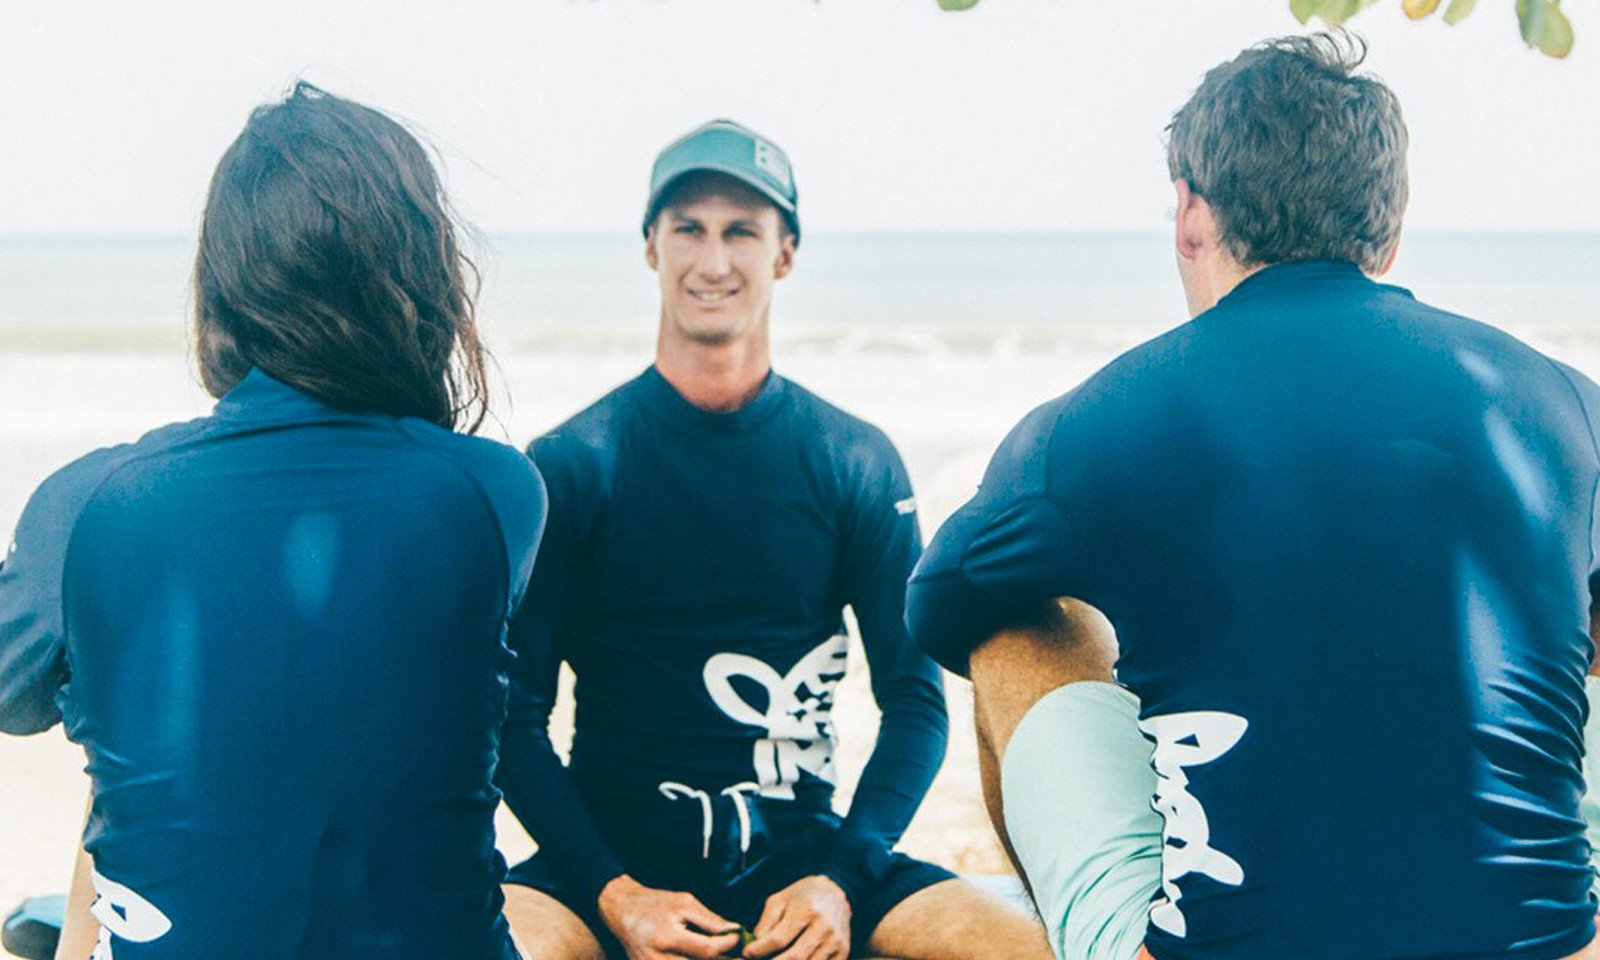 Surf Coaches, Learn How to Surf Better